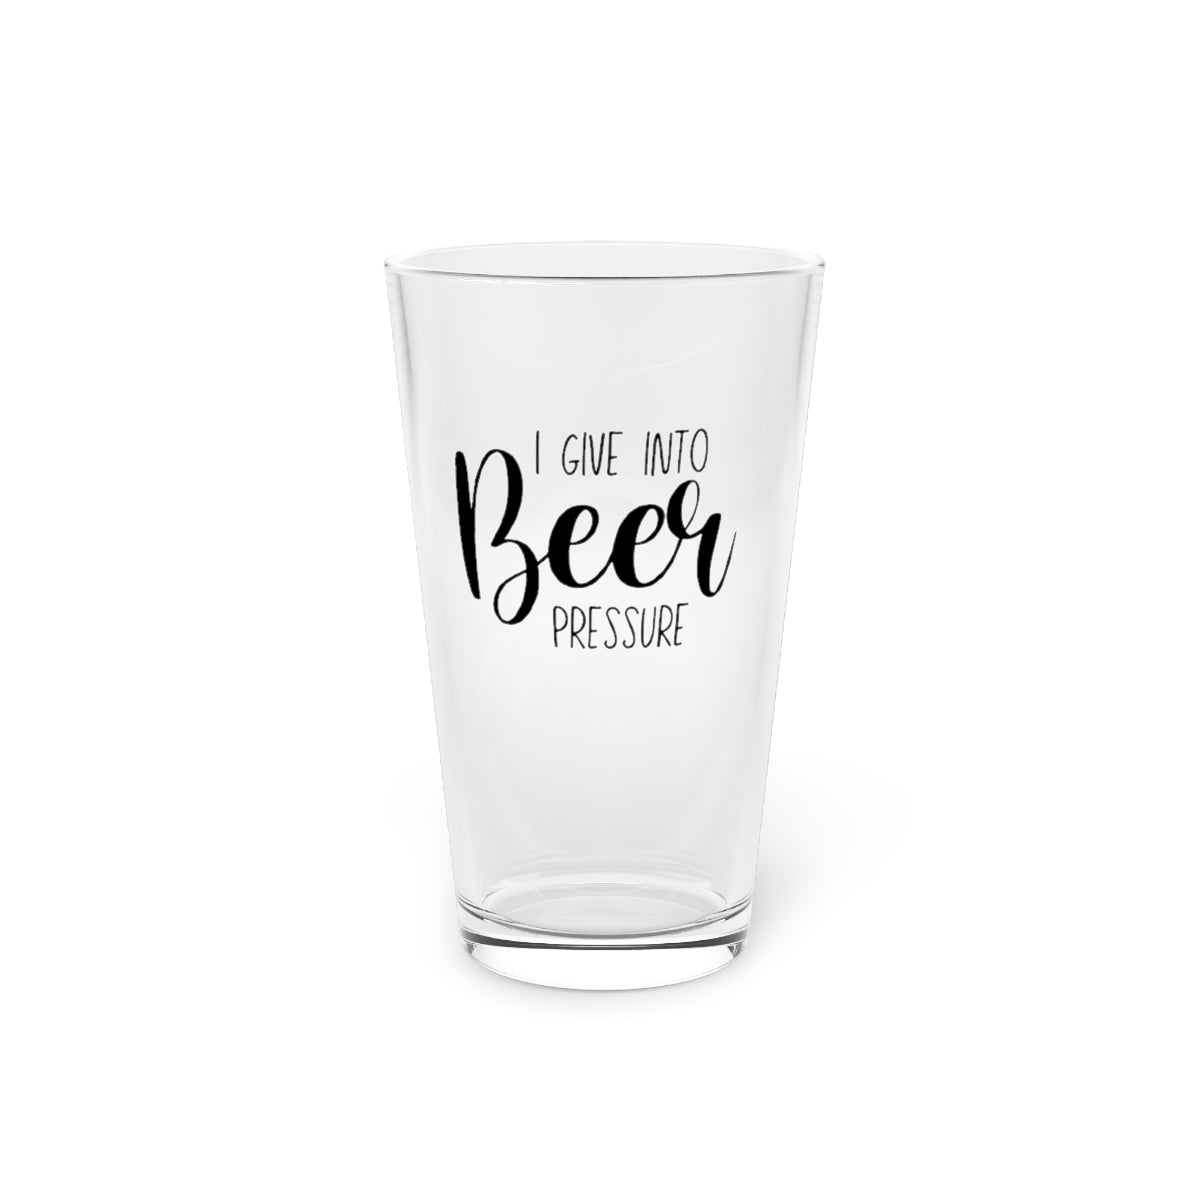 I Give Into Beer Pressure | Funny Beer Glass